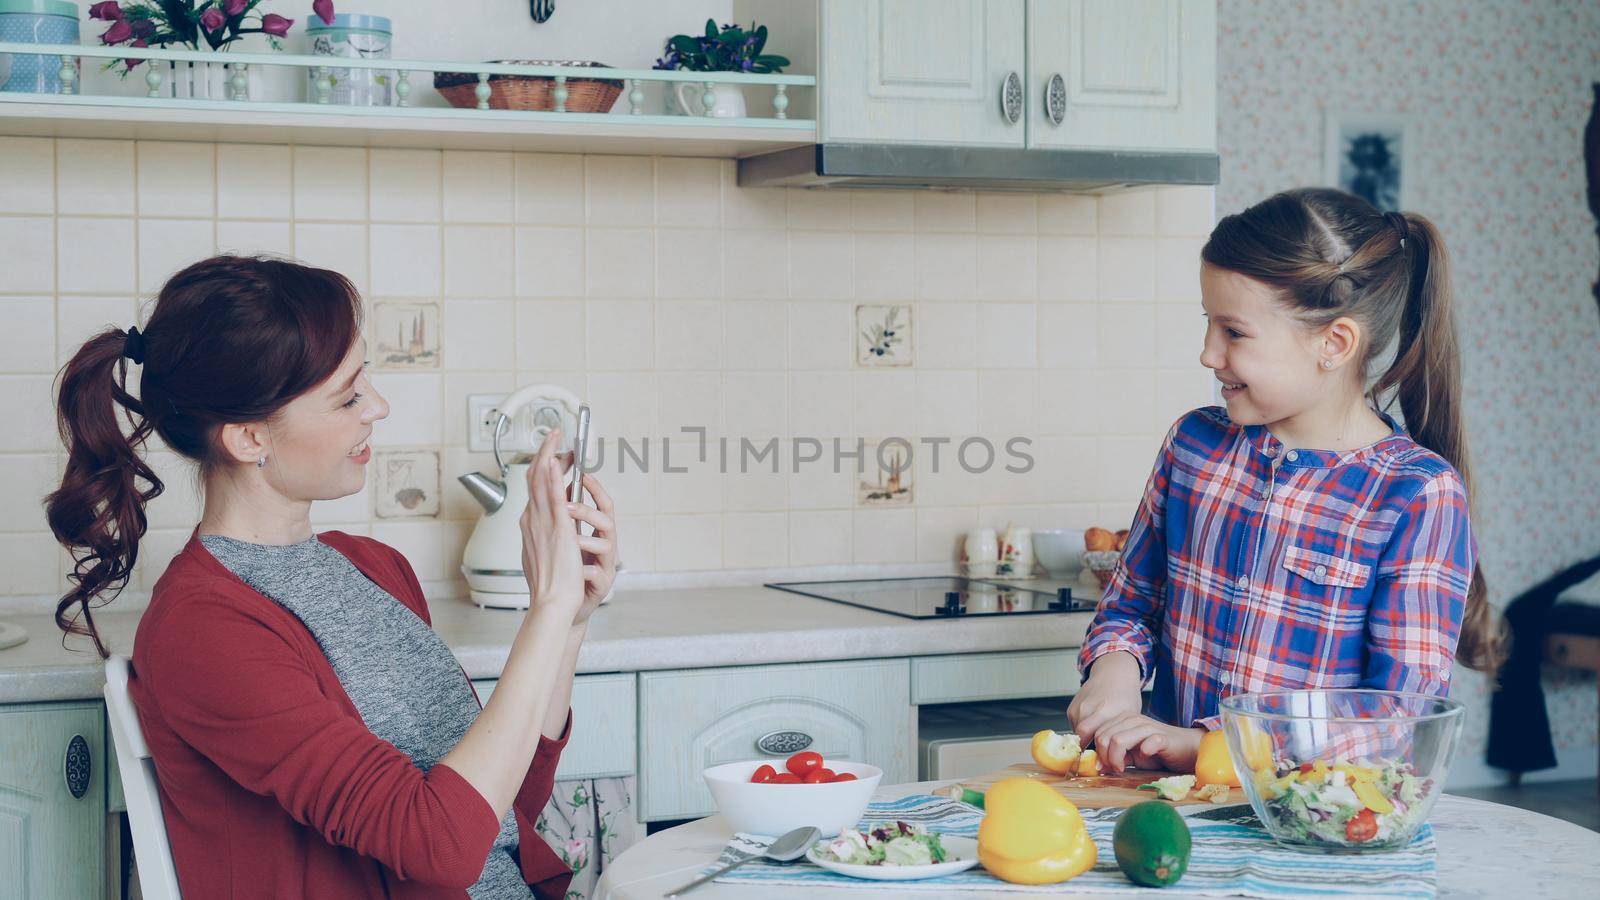 Young mother talking photo on smartphone camera of her cute smiling daughter cooking cutting vegetables in the kitchen at home. Family, cook, and people concept by silverkblack